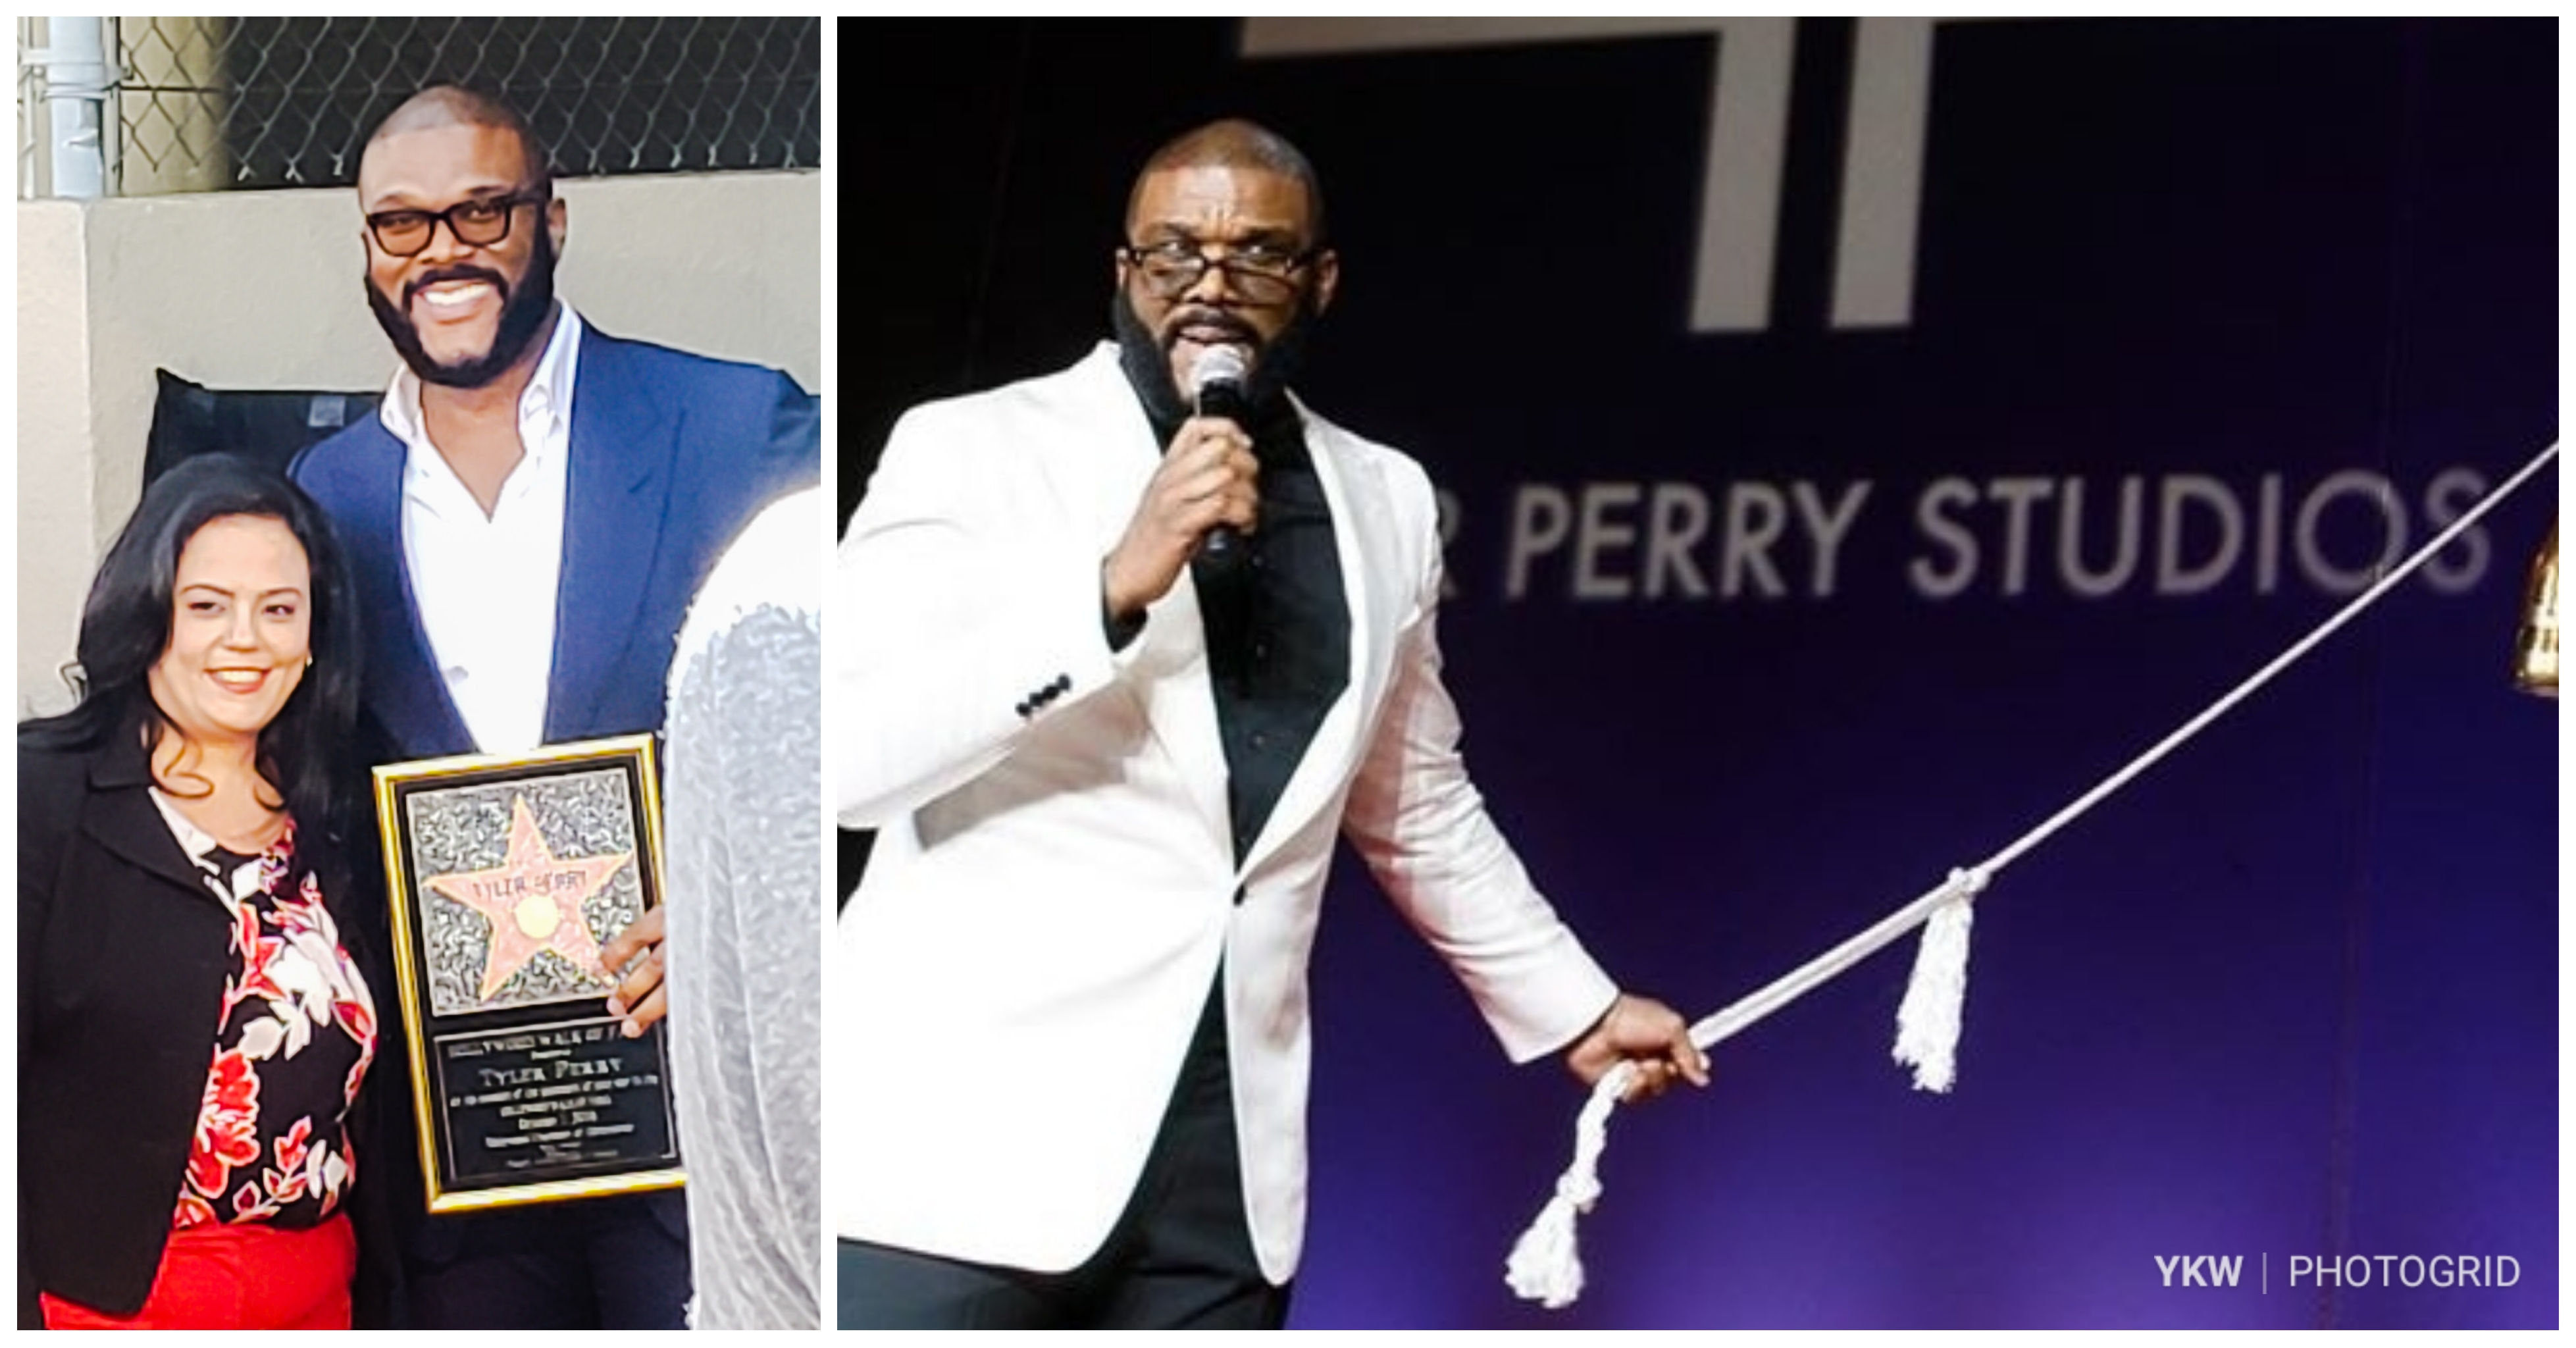 Tyler Perry Gets Hollywood Star And Celebrates Studio Grand Opening In The Same Week